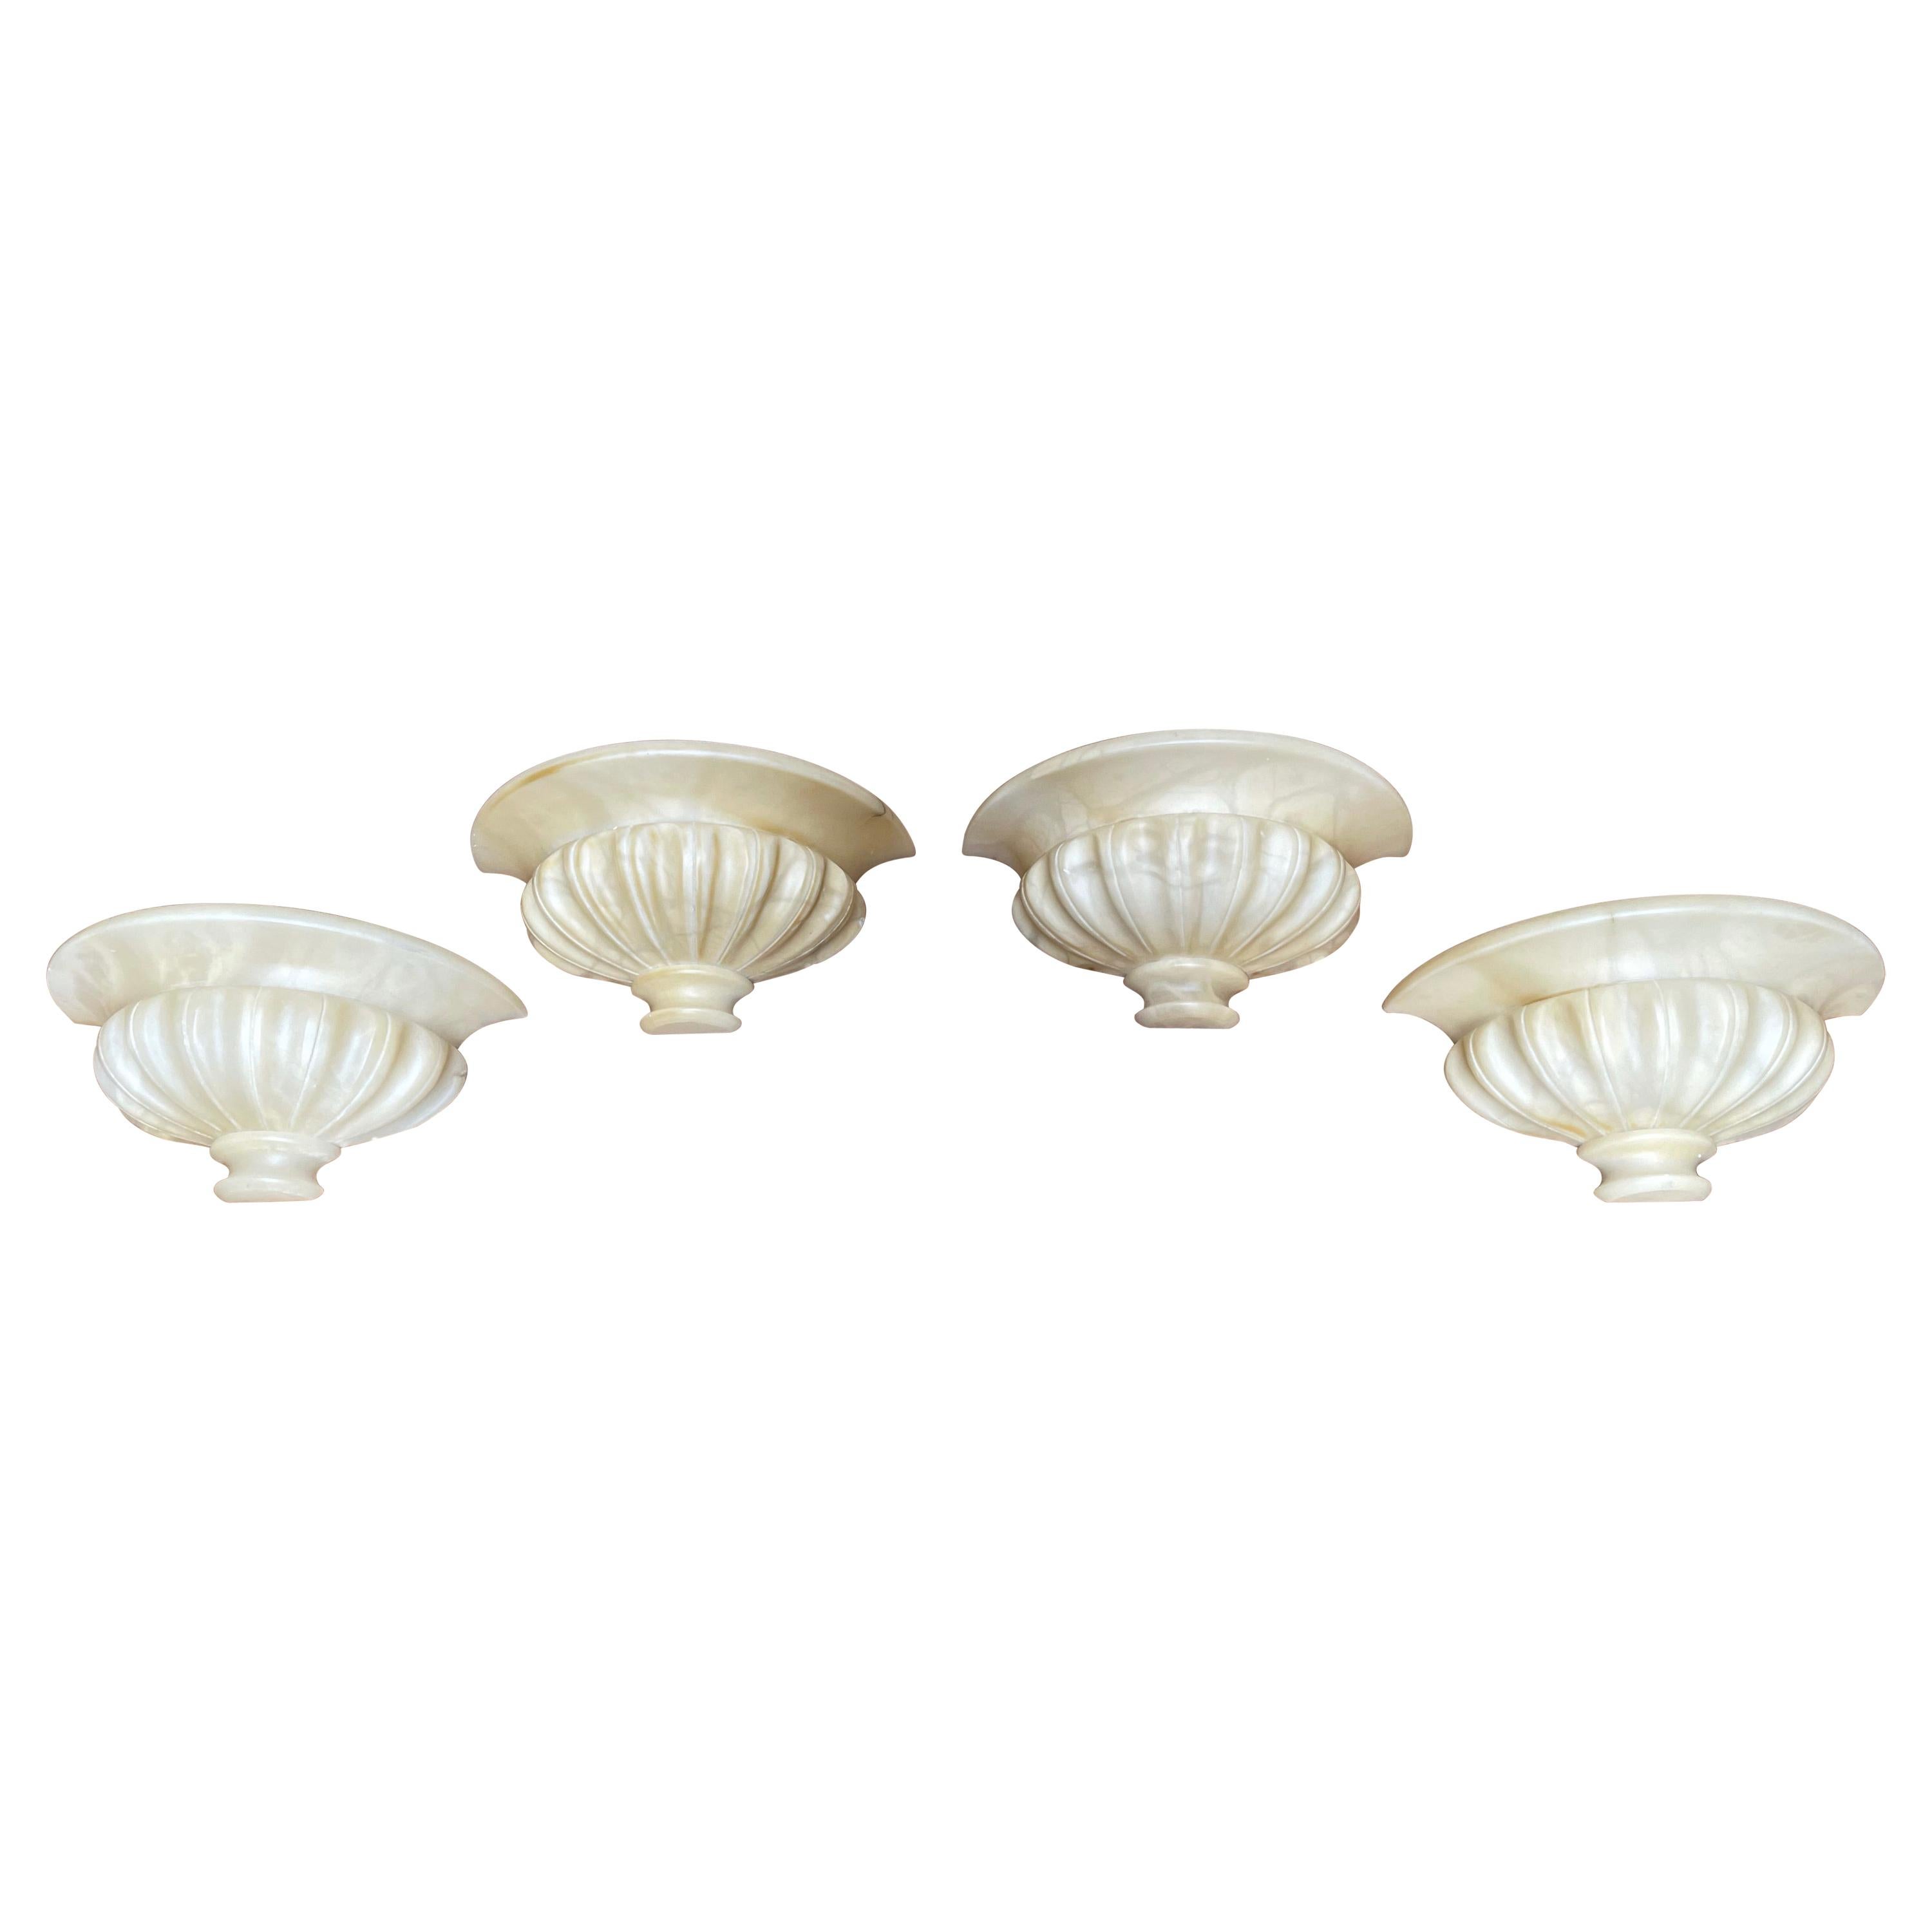 Great Shape Set of 4 Art Deco Style Alabaster Wall Sconces / Fixtures